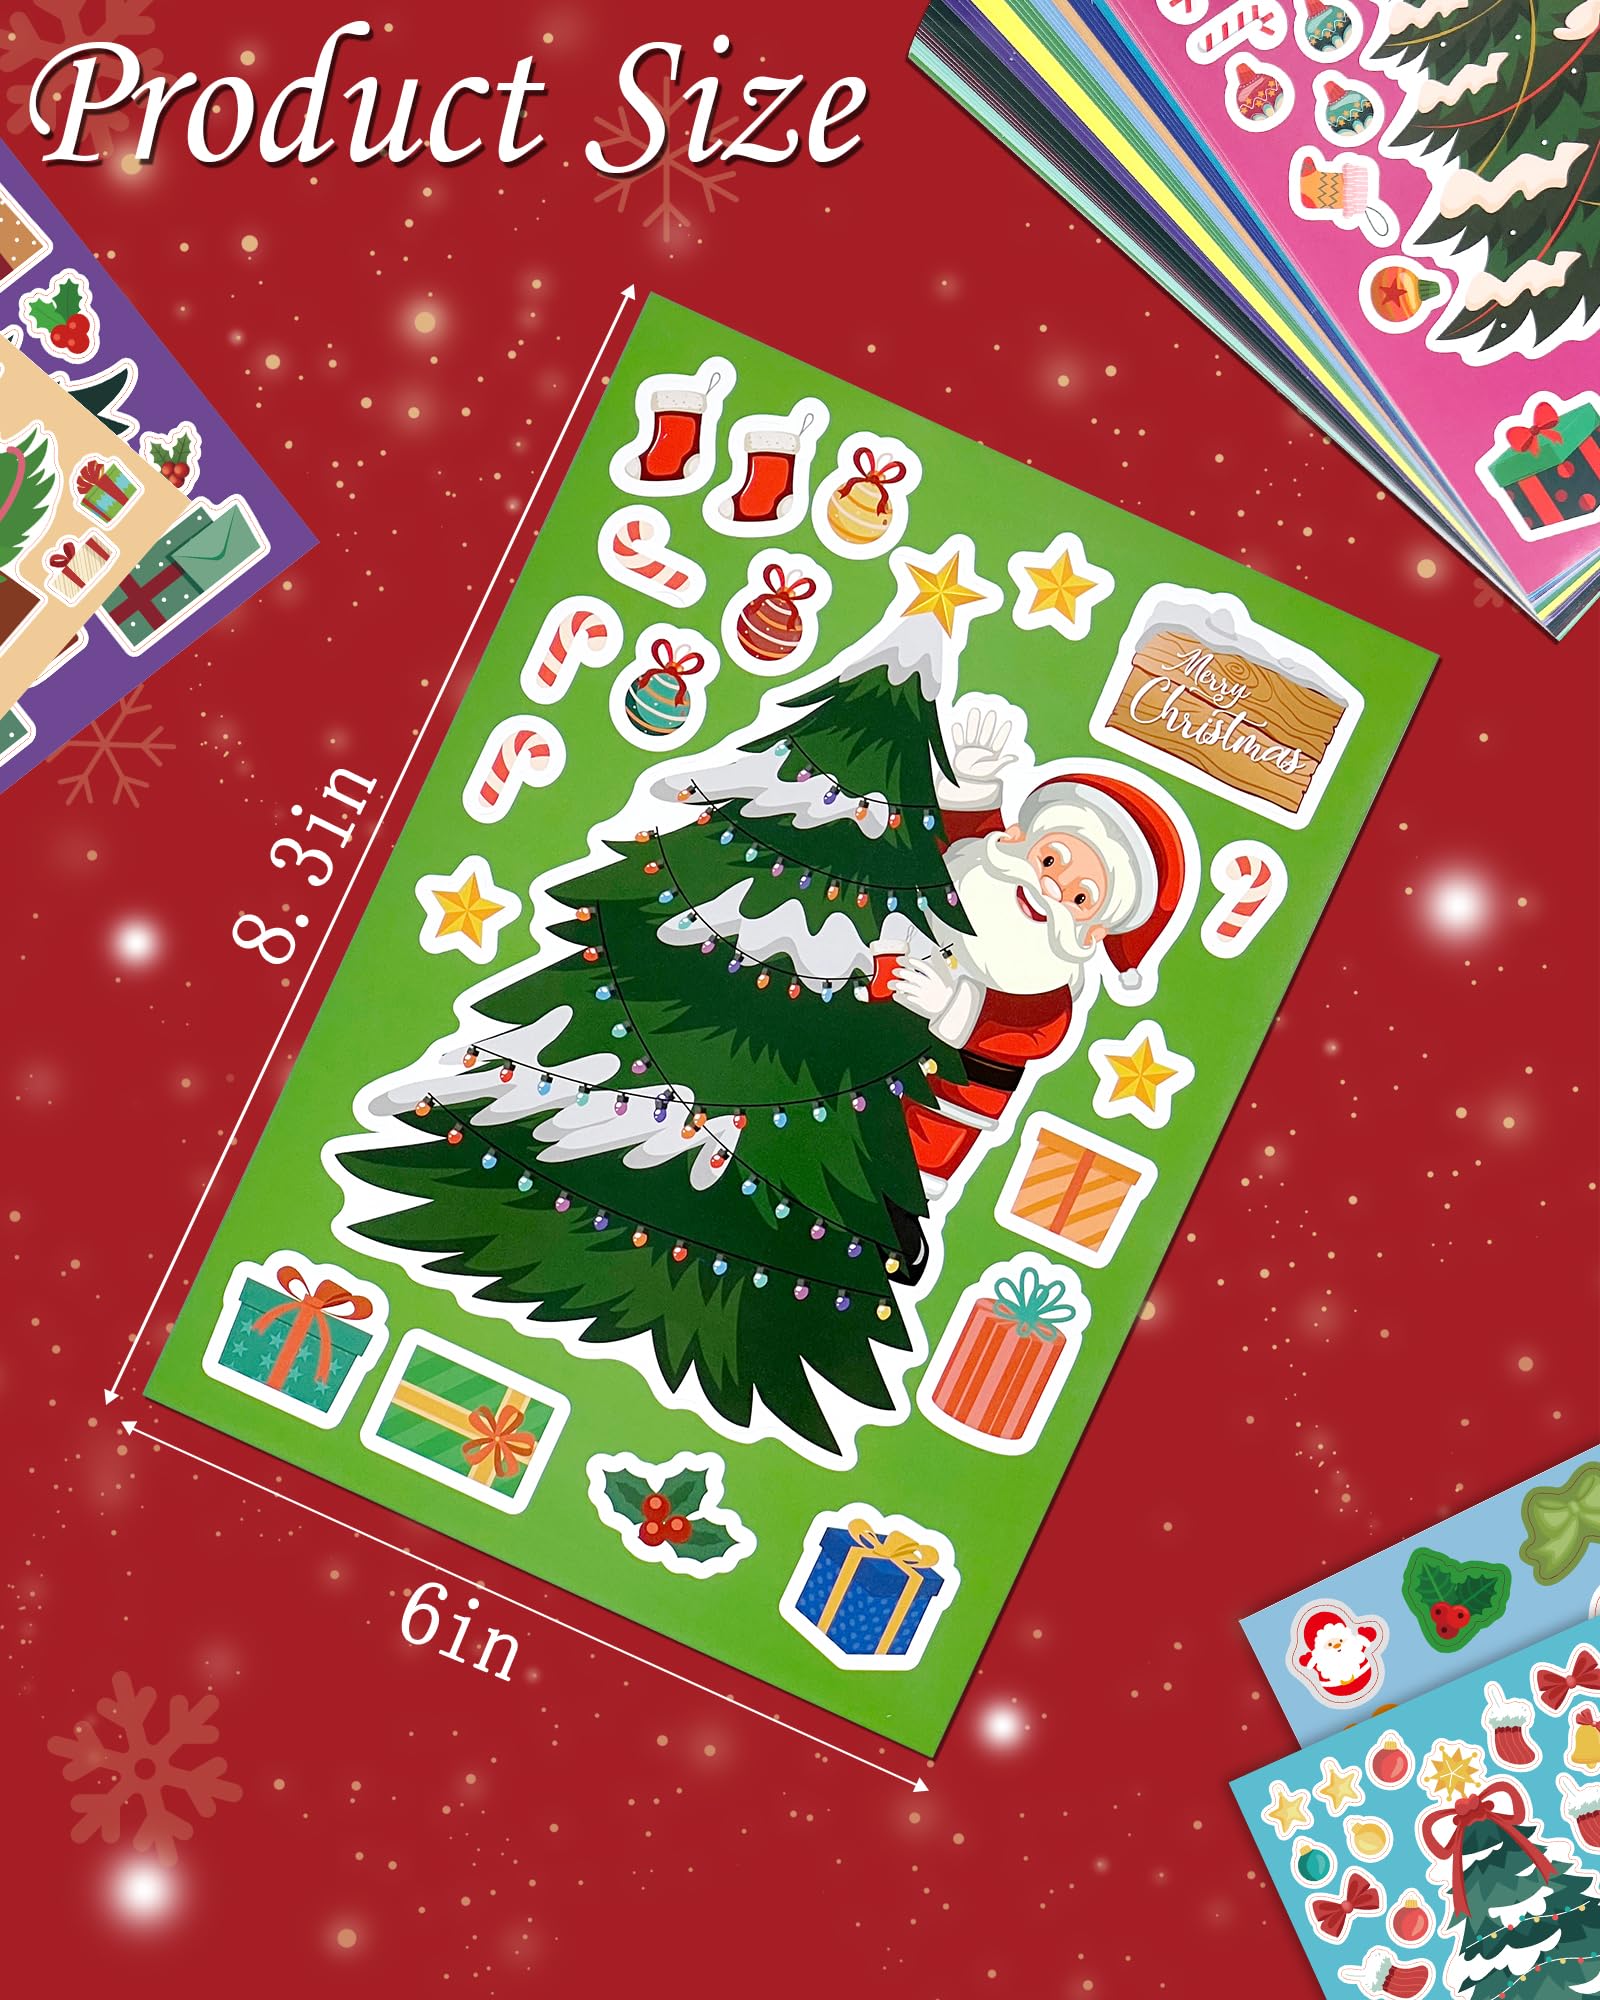 Make Your Own Christmas Tree Stickers, Christmas Art And Crafts Gift for Kids